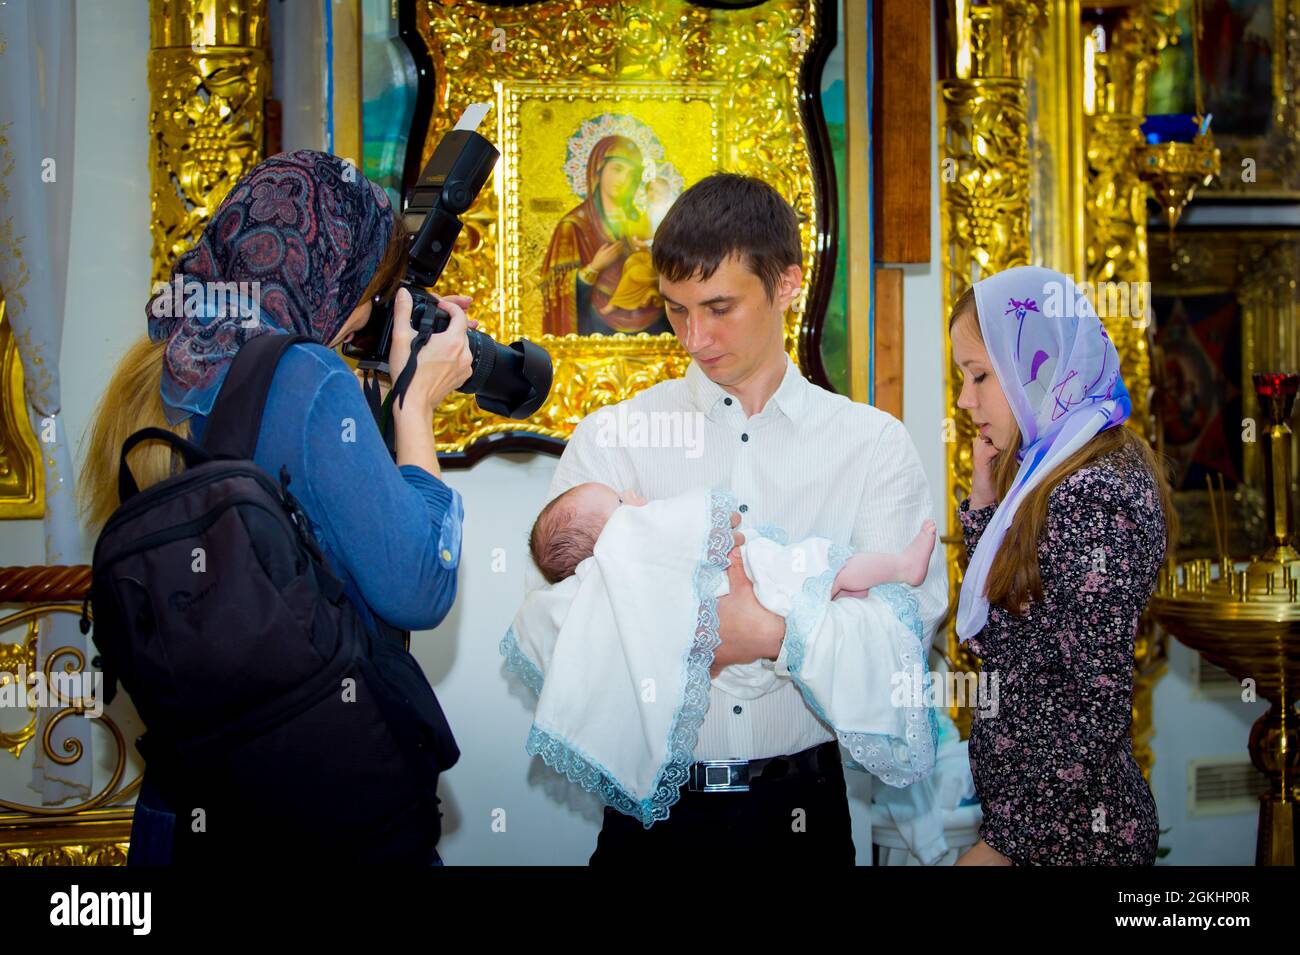 Dnepropetrovsk, Ukraine - 05.23.2015: A beautiful woman photographer is doing her job. Baptism of a child in a church. Stock Photo